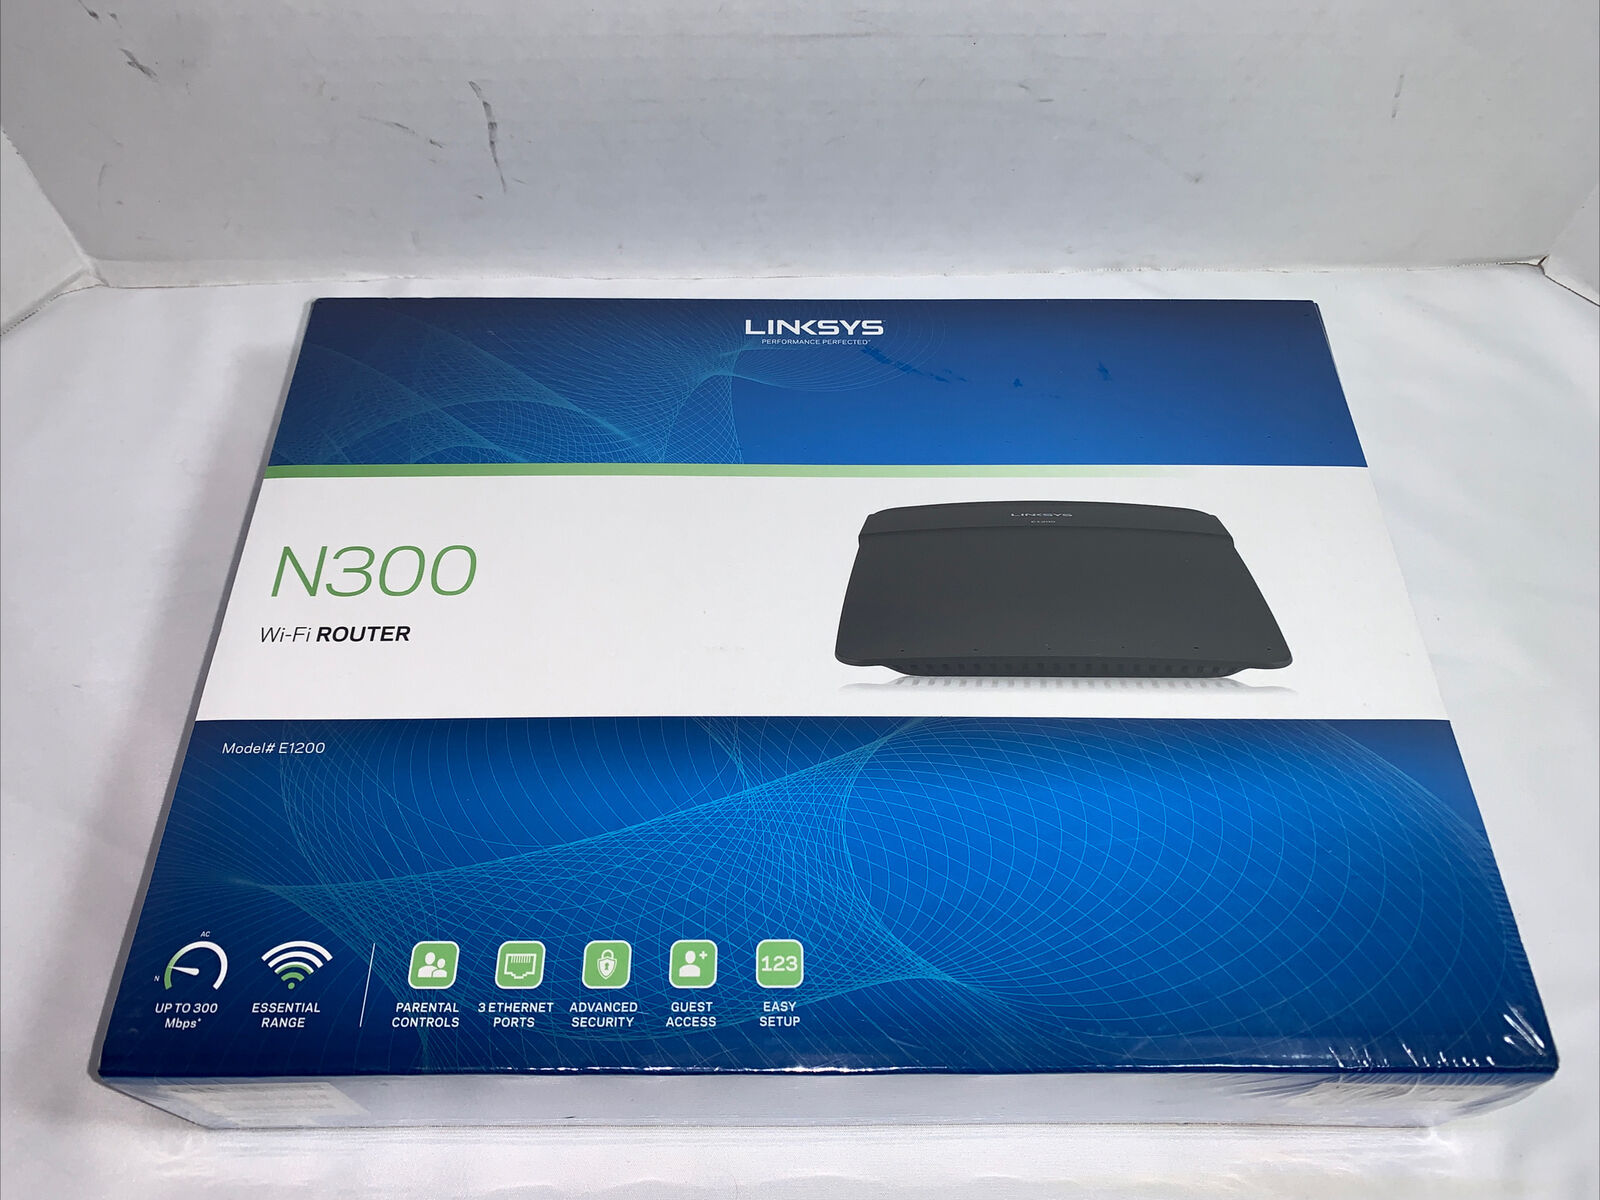 Linksys N300 Wireless WiFi Router Model #E1200-VV New Sealed Box